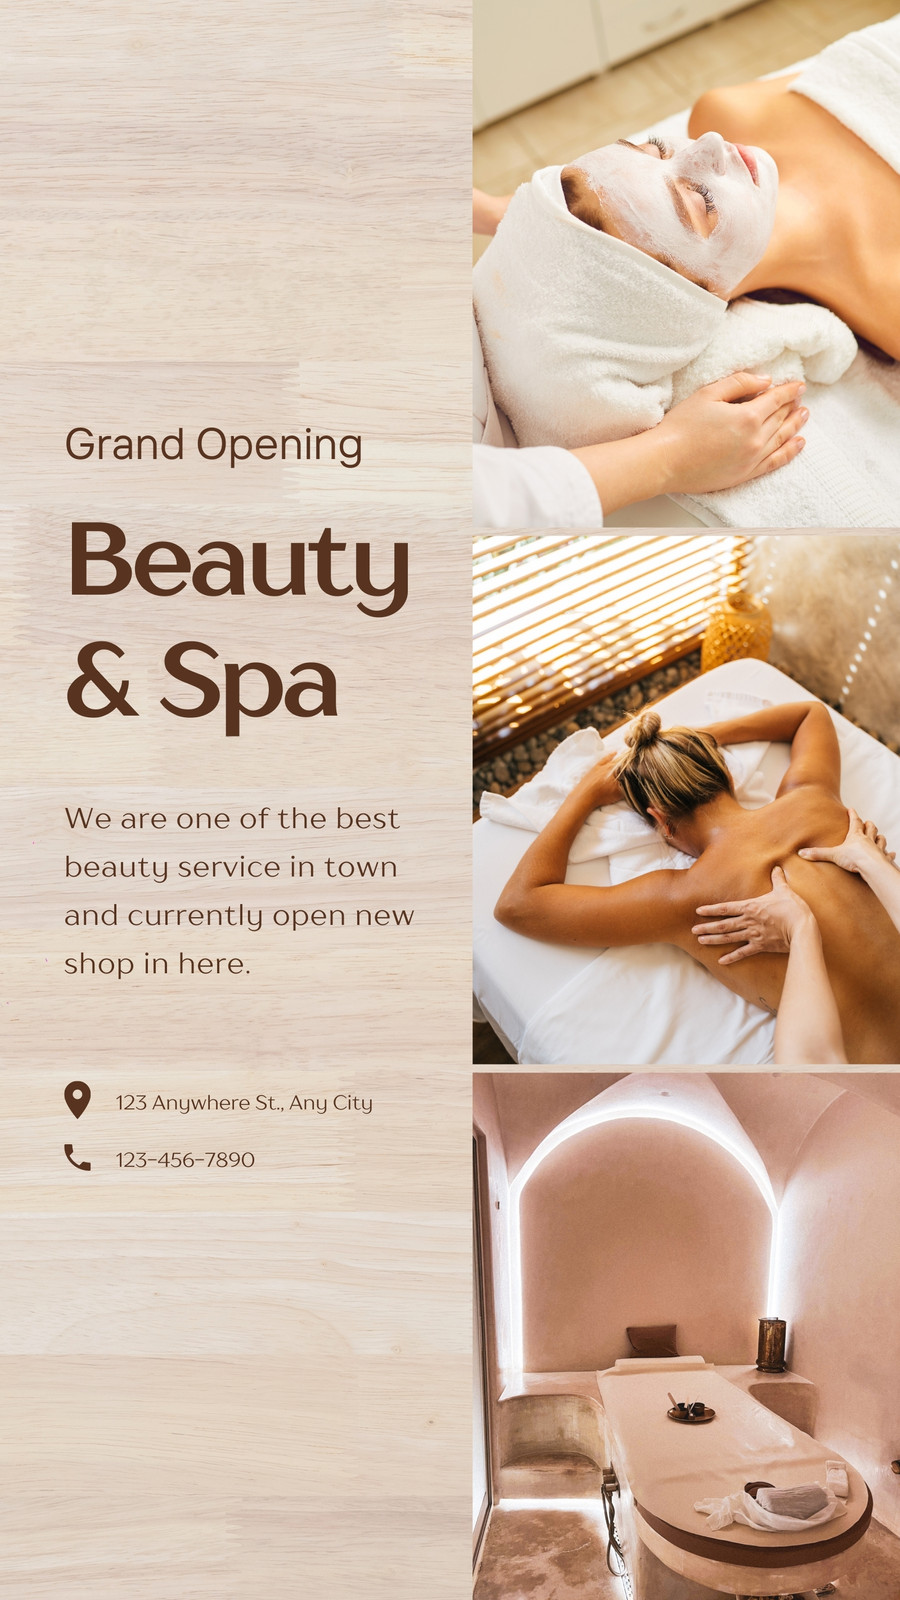 Free and customizable spa templates